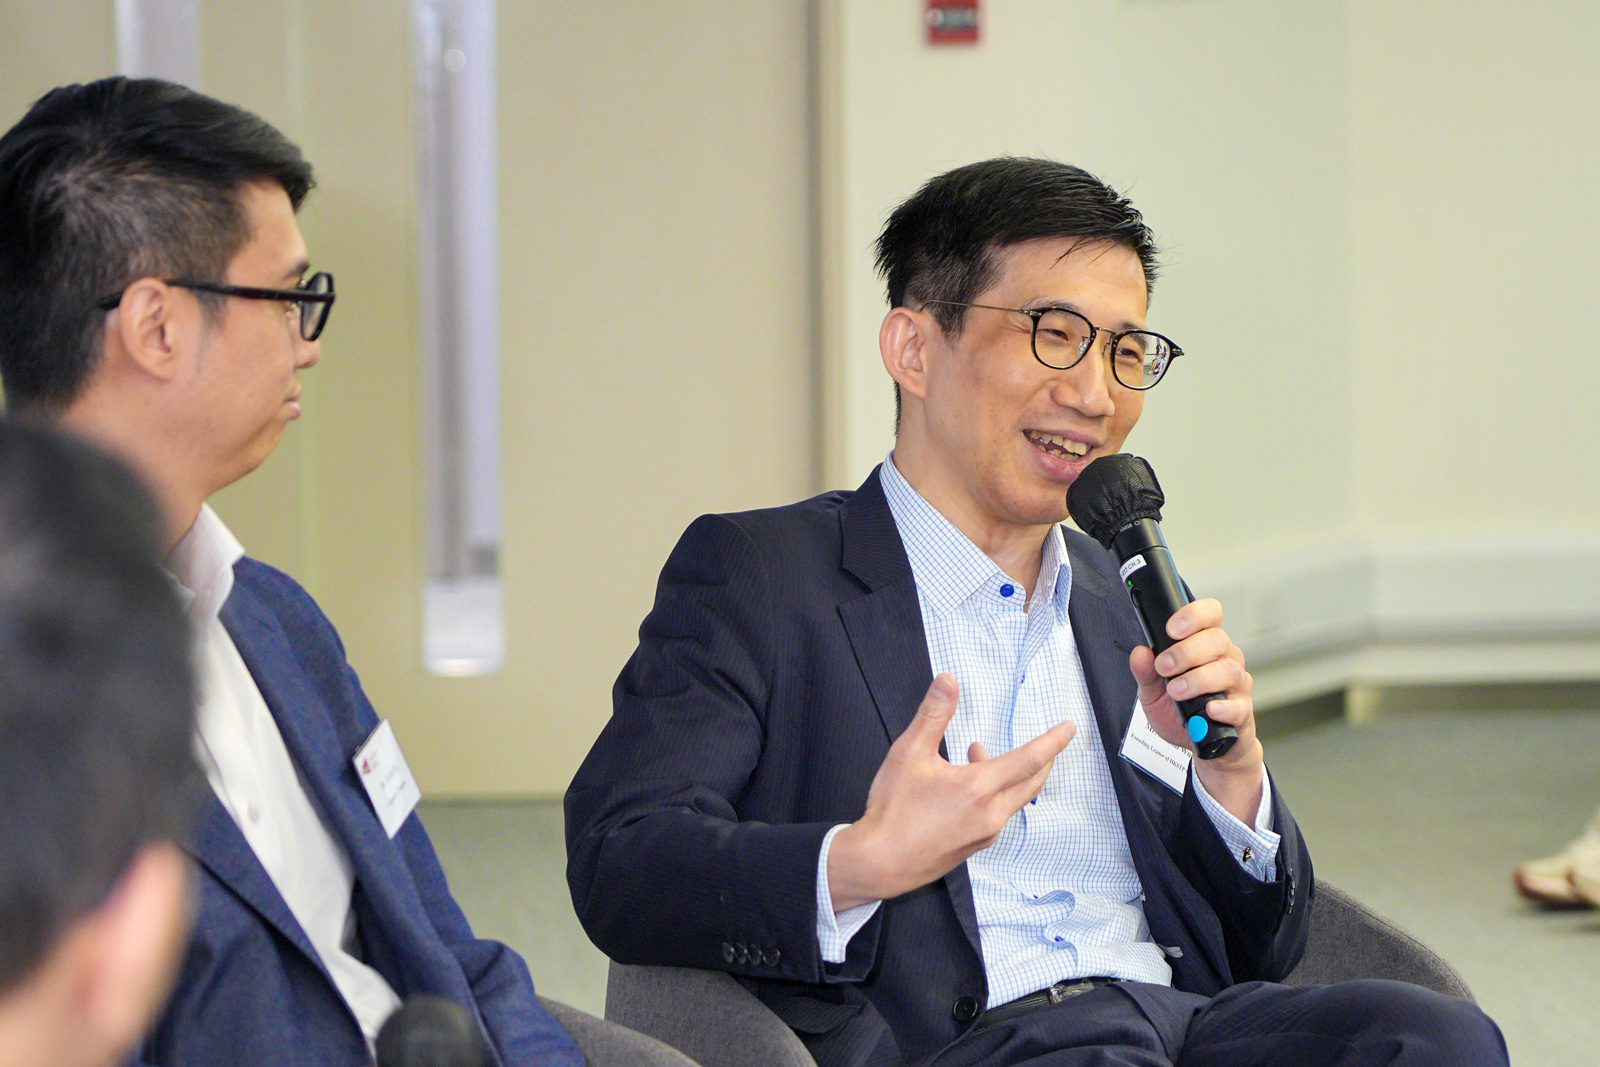 Mr Sammi Wong exchanges his ideas with other panellists during the panel discussion